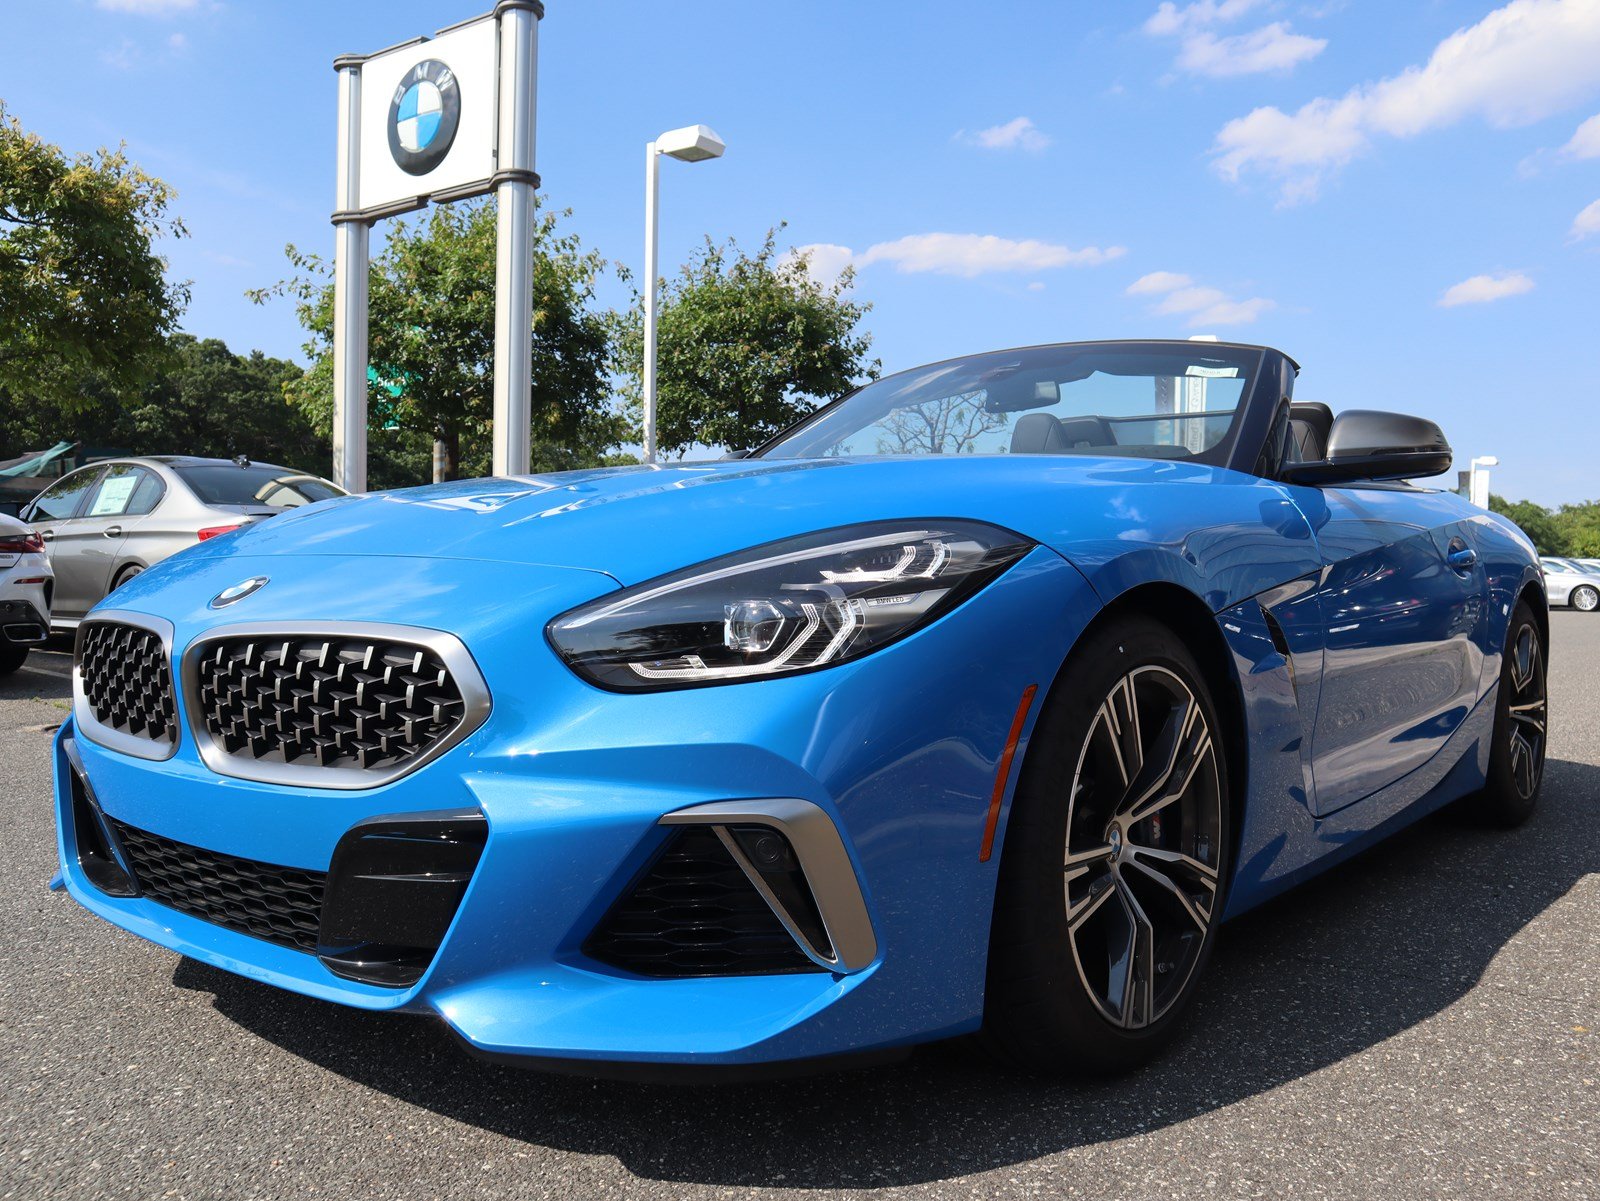 New 2020 BMW Z4 M40i Roadster Convertible in Bay Shore #4010H